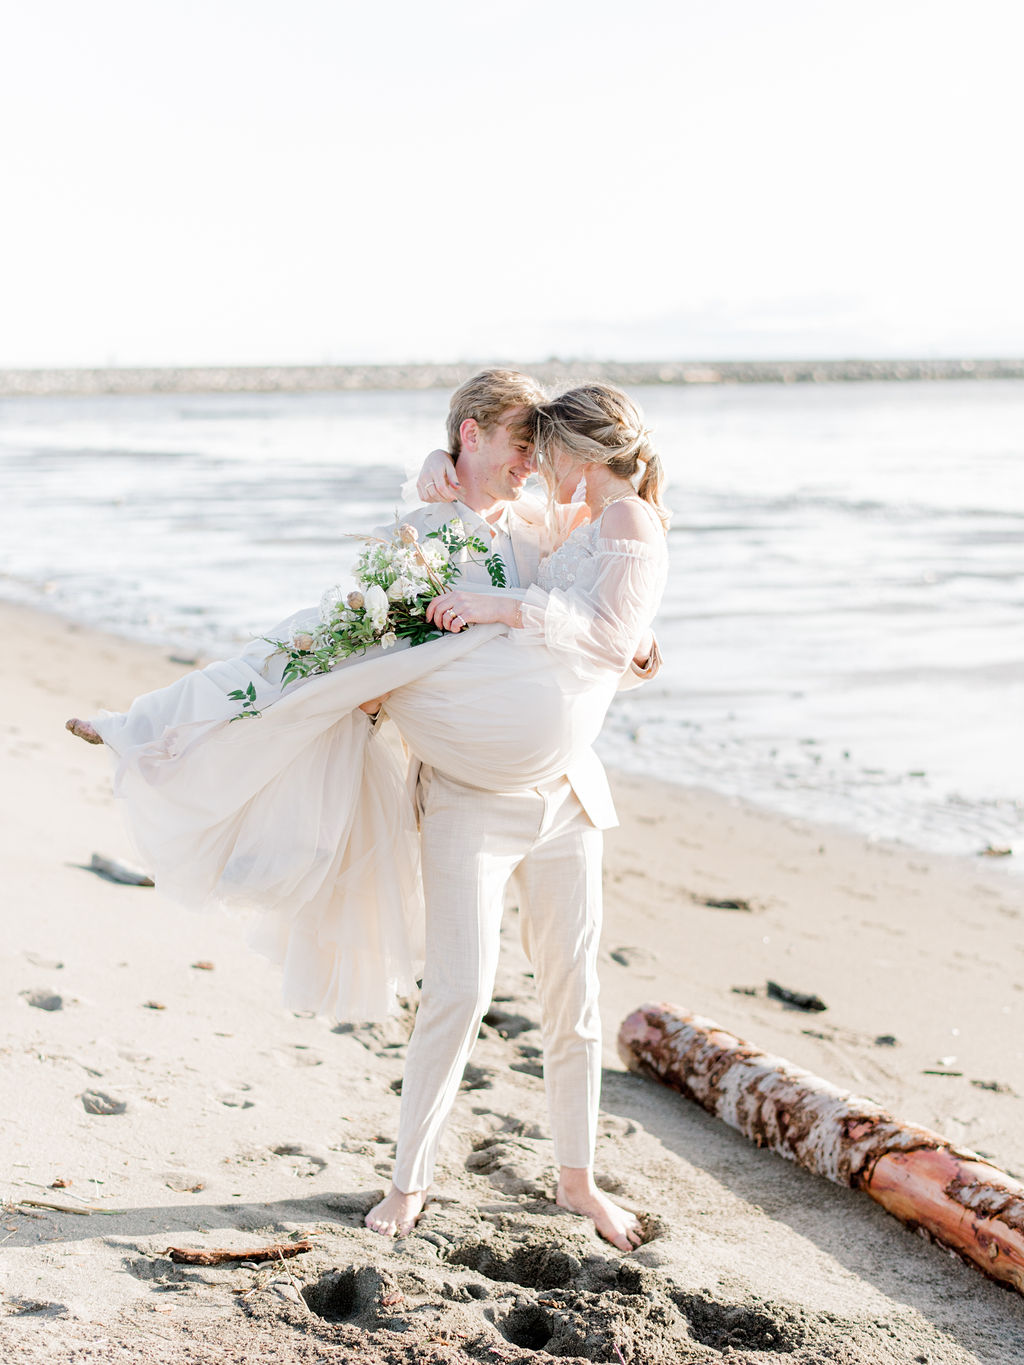 Romantic wedding portraits on the beach in Vancouver, British Columbia;  flowy beach wedding dress with poofy sheer sleeves, beach wedding attire, beach bridal style, bride hair and makeup ideas, low bridal ponytail for an intimate wedding